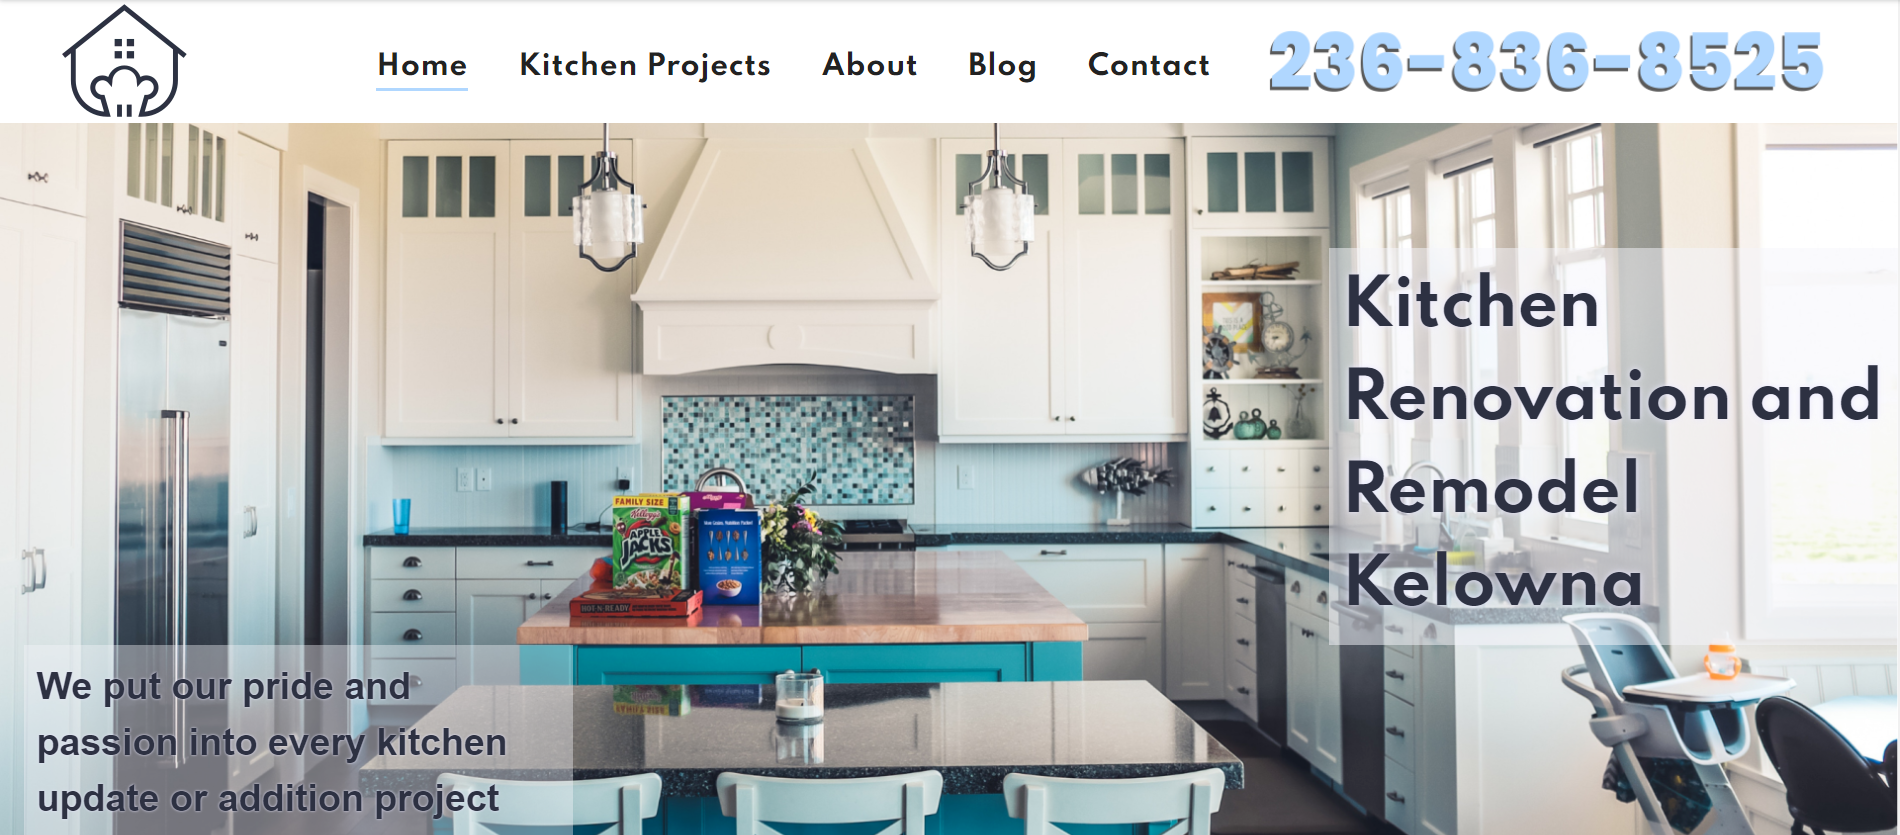 Image of a kitchen renovation designer and contractor site